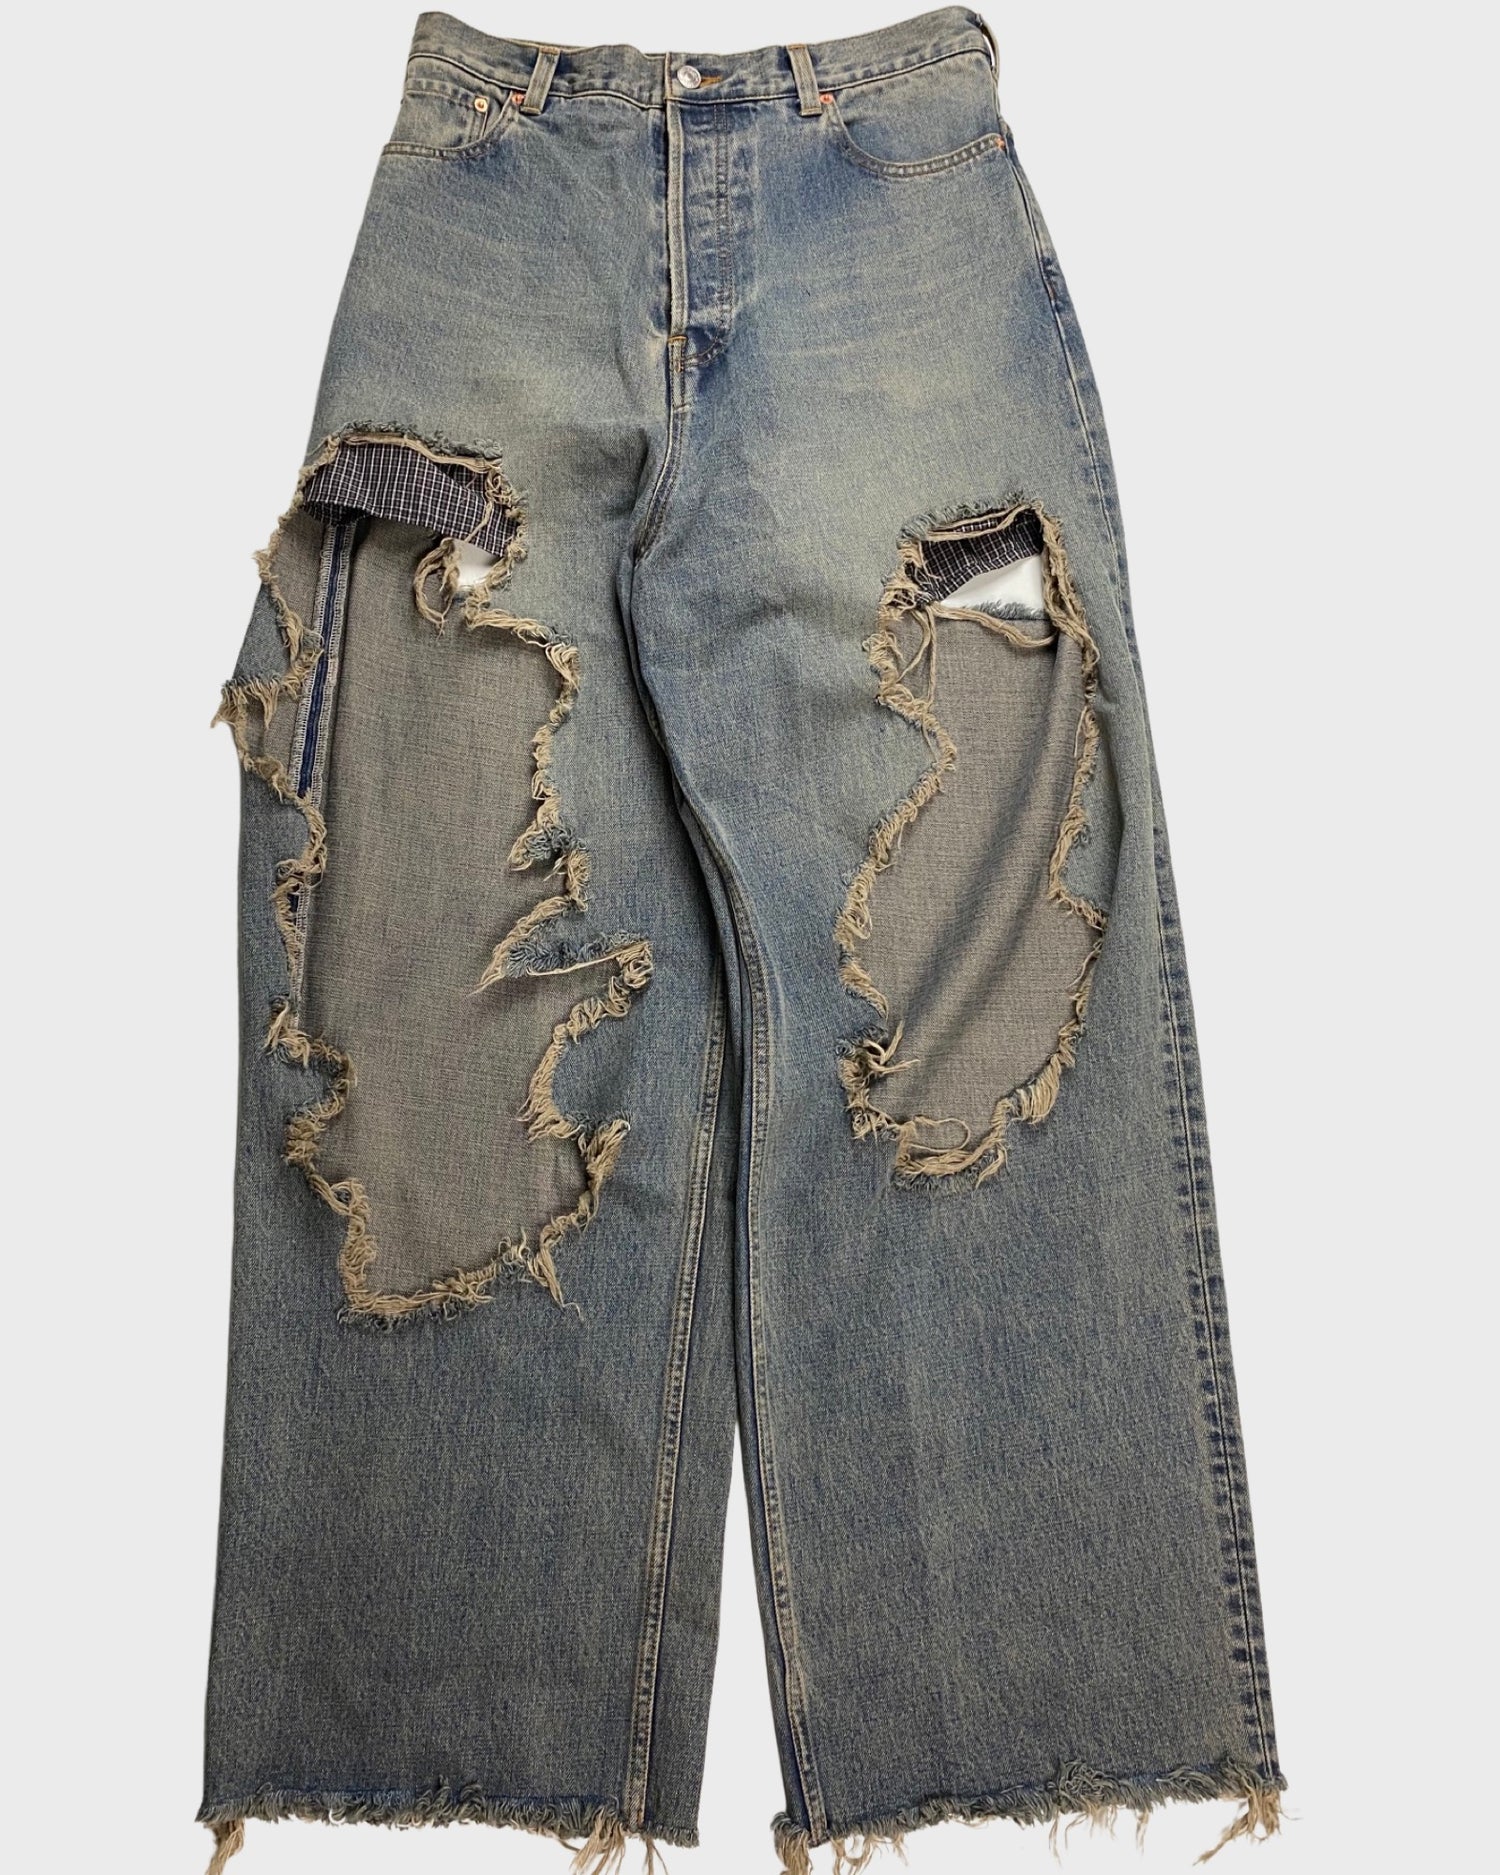 Balenciaga destroyed torn Jeans in blue SZ:S|M –